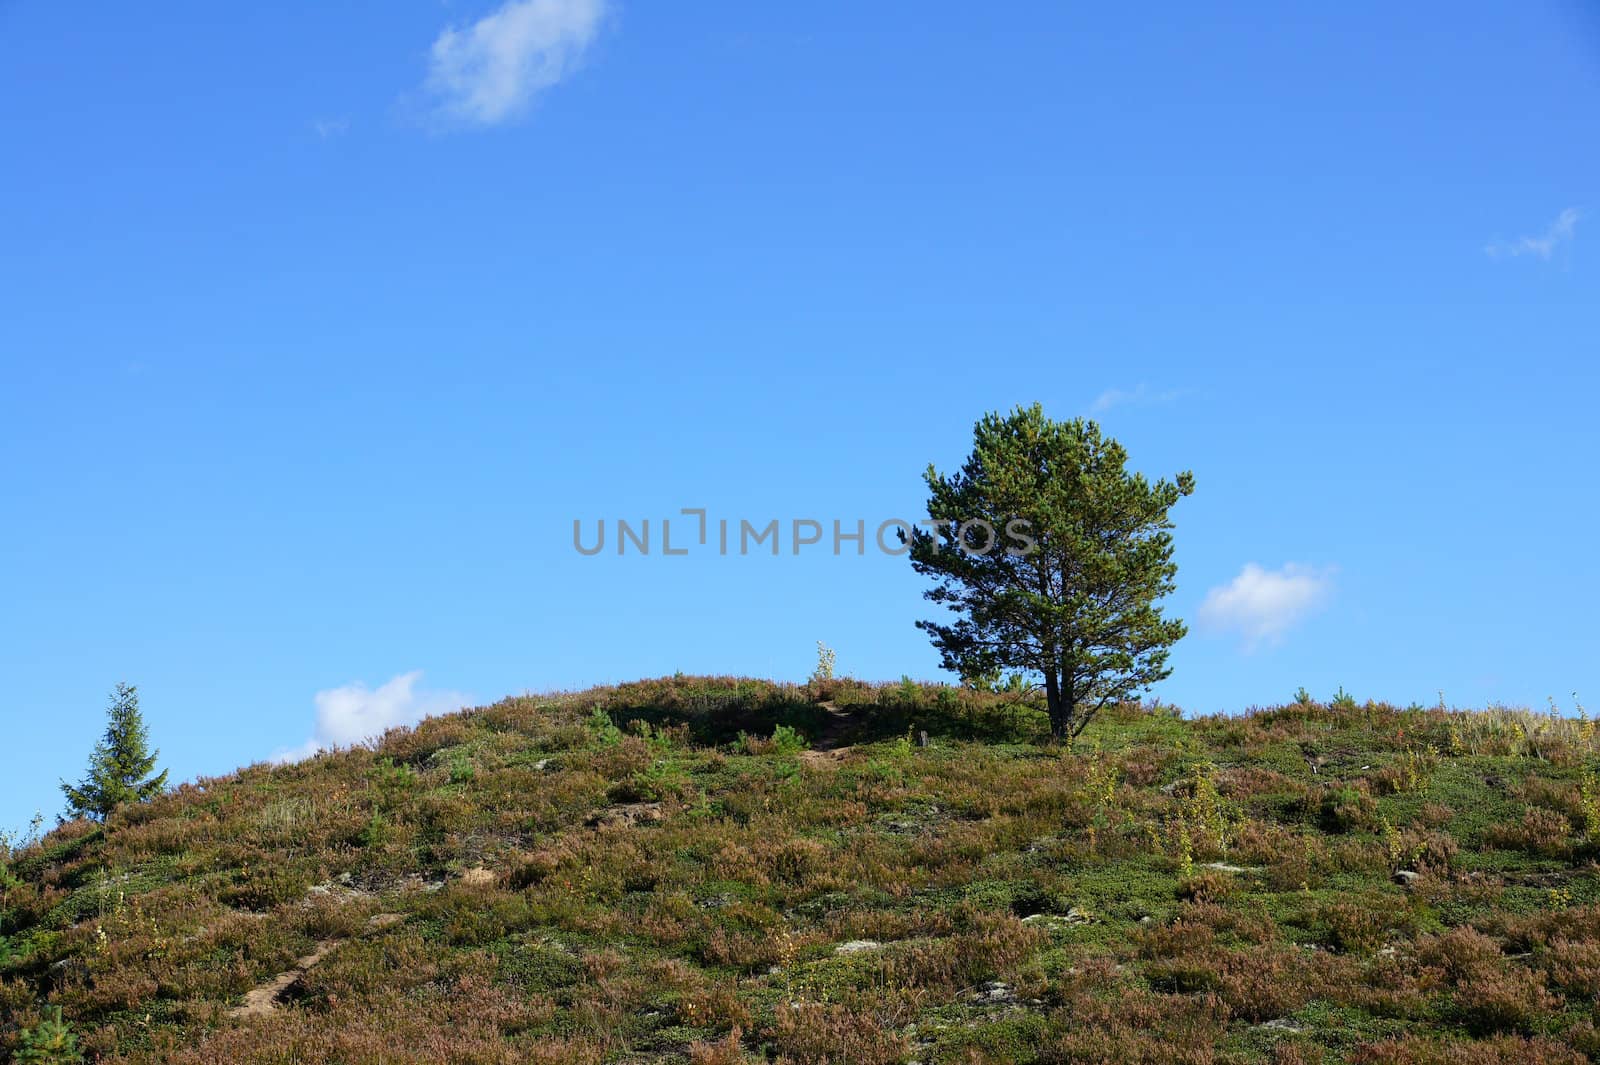 Perfect lone green tree against blue sky in a natural environment